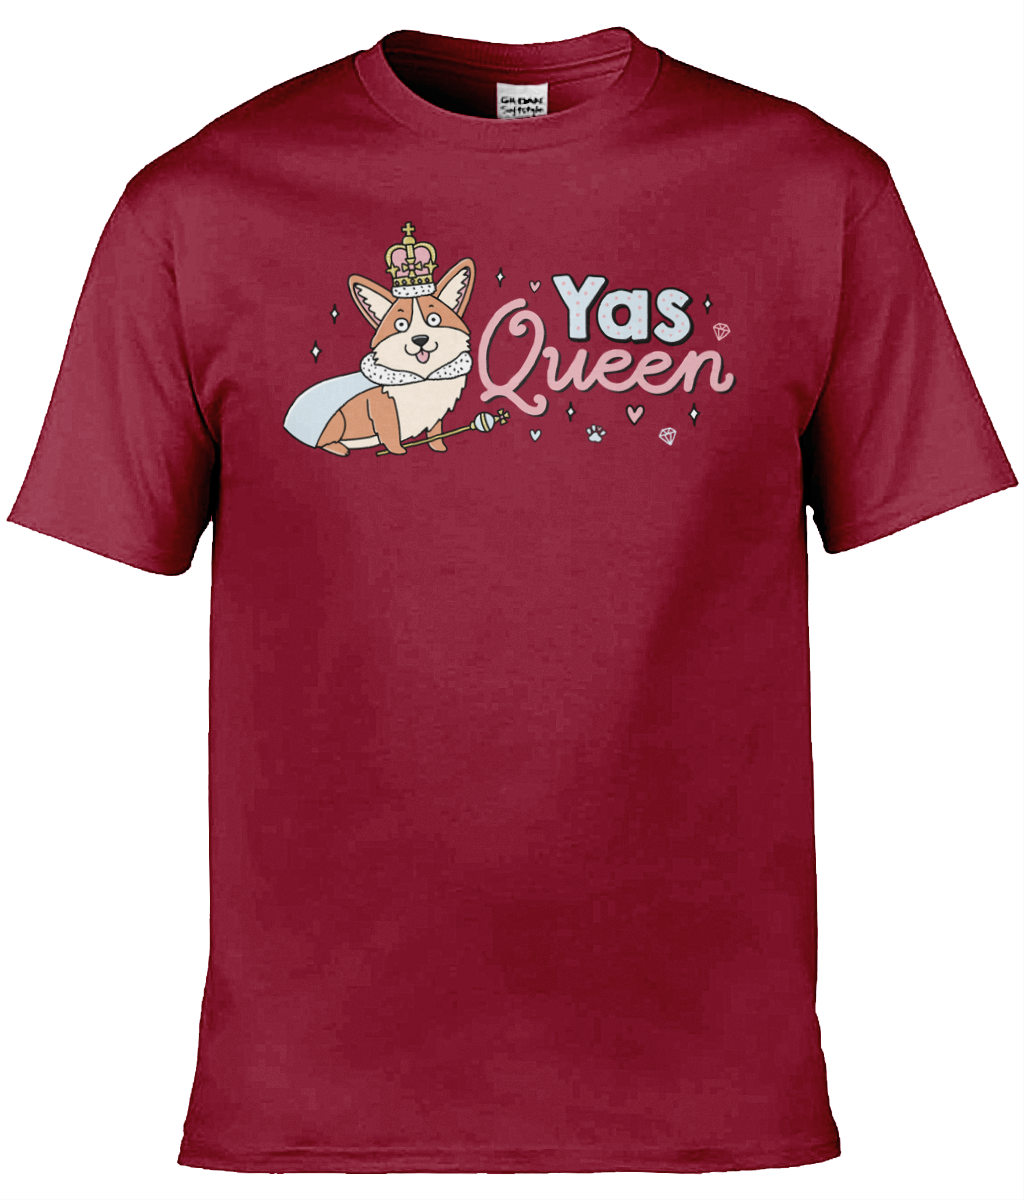 YAS QUEEN T-Shirt - Multi Colour Available